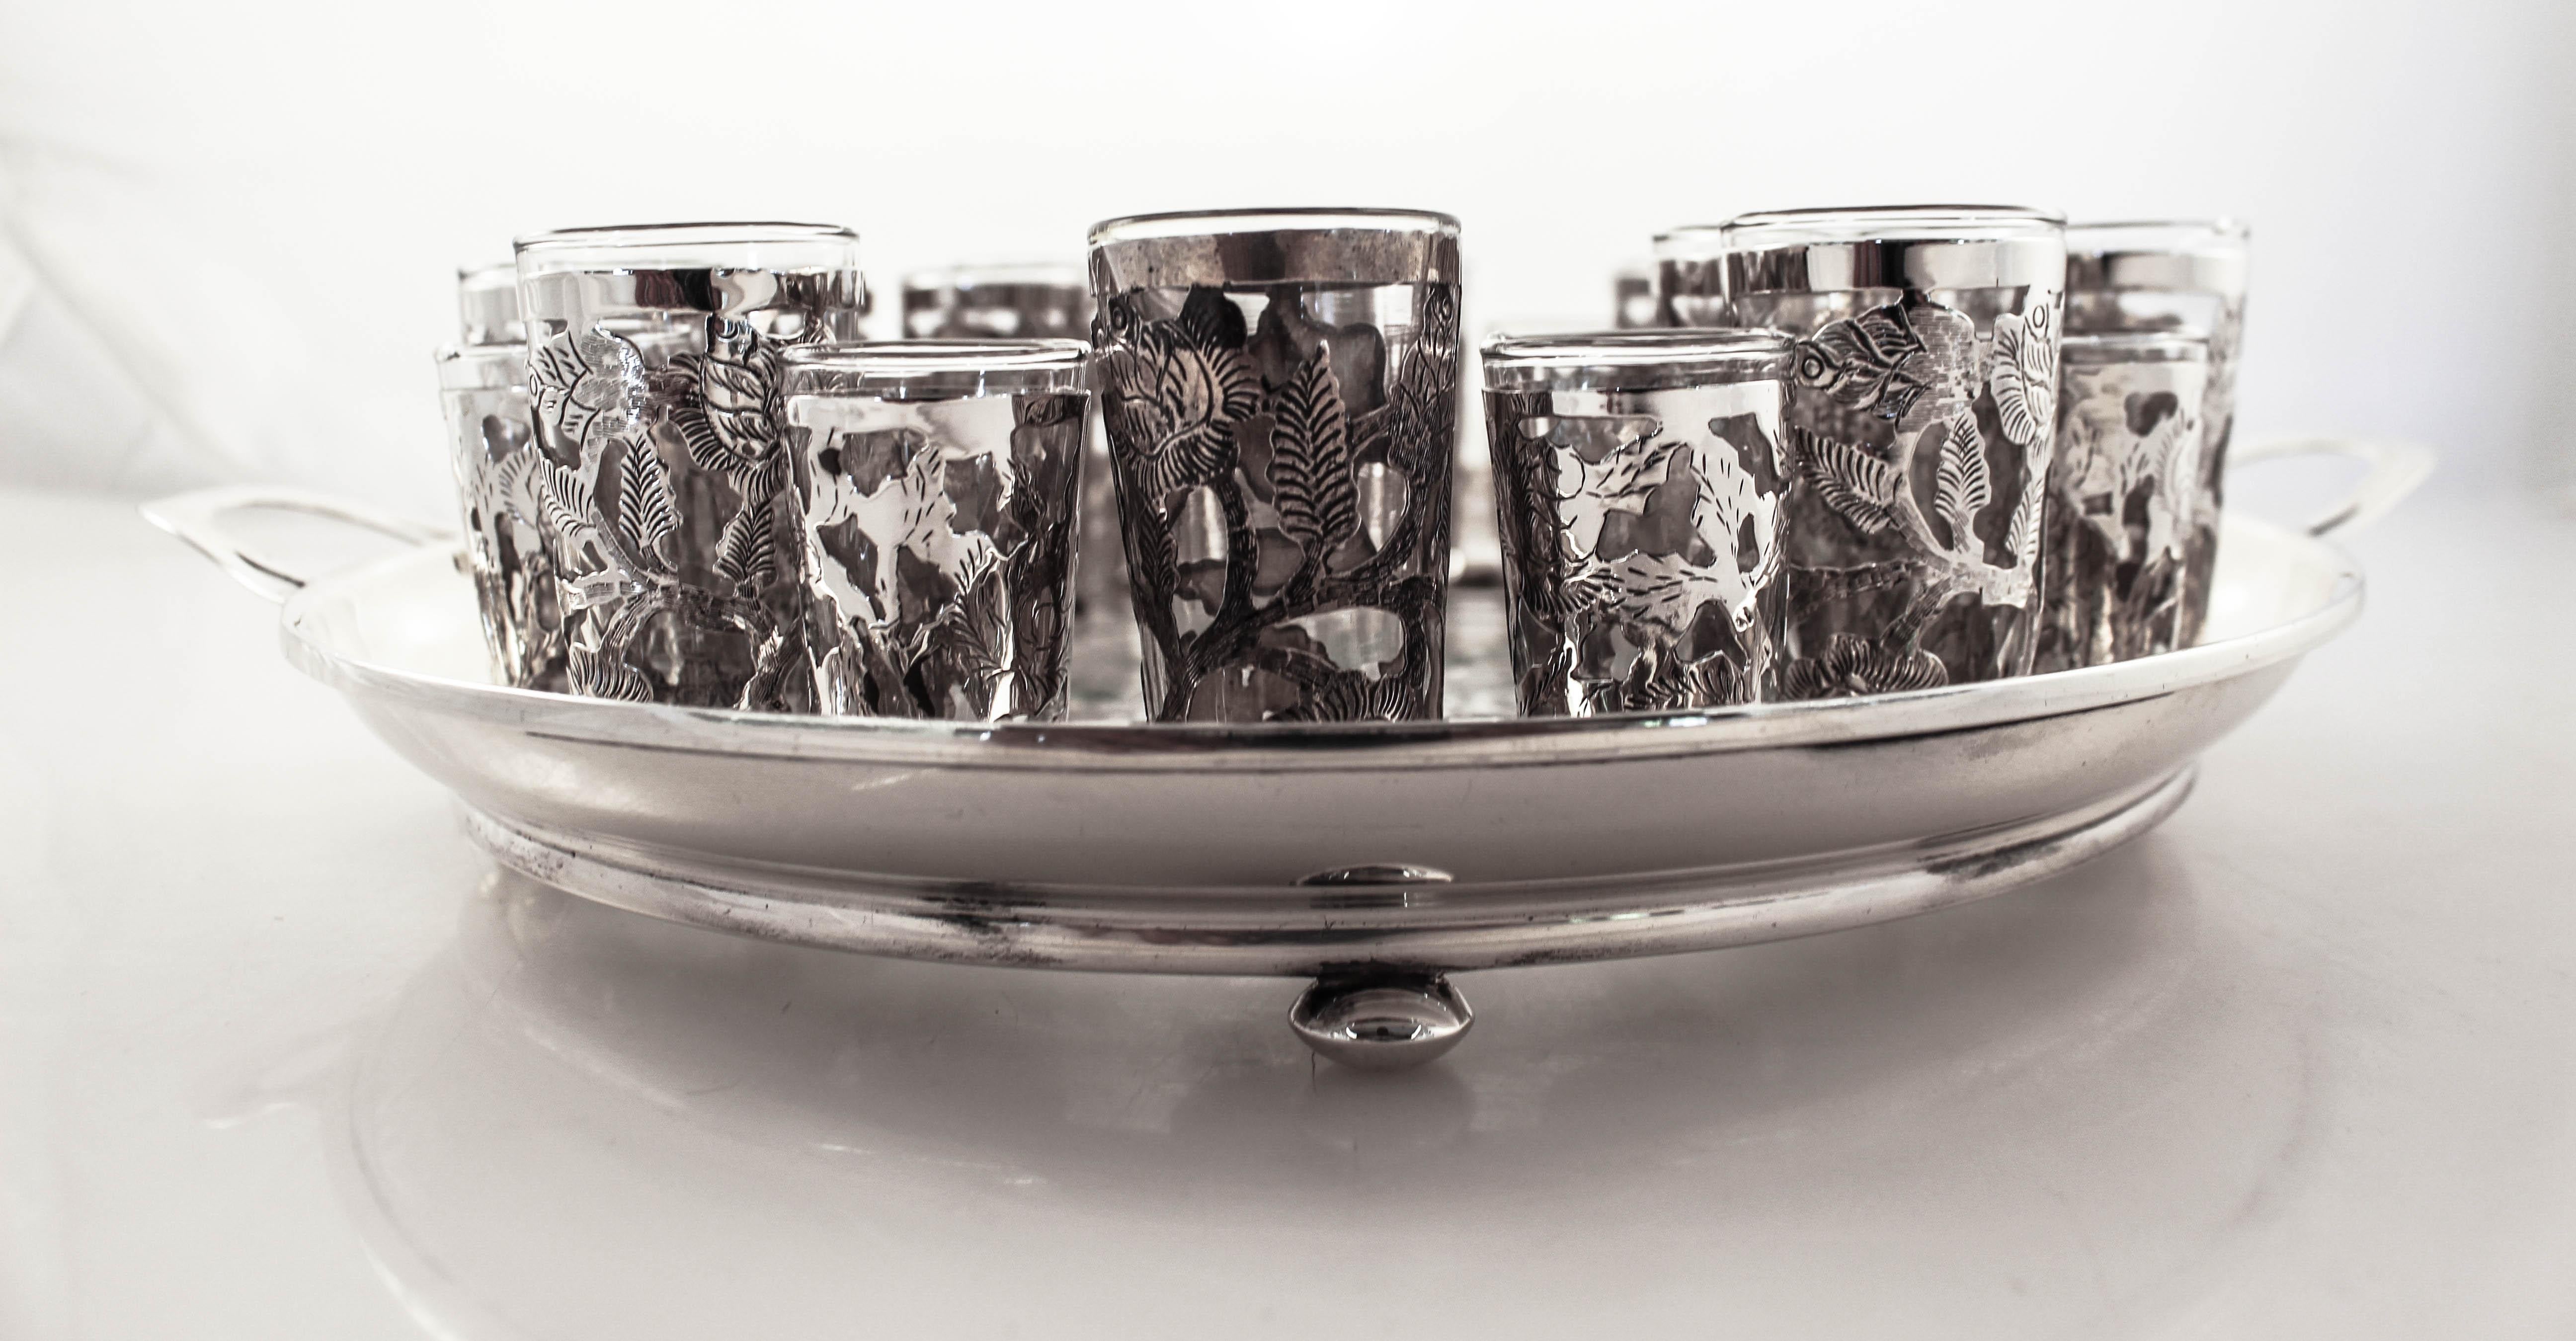 We are delighted to offer this large sterling silver liquor set that includes 24 glasses (12 larger and 12 smaller ones) and a tray. Each glass has a floral latticework overlay design. The glass portion is removable so it’s super easy to wash— even